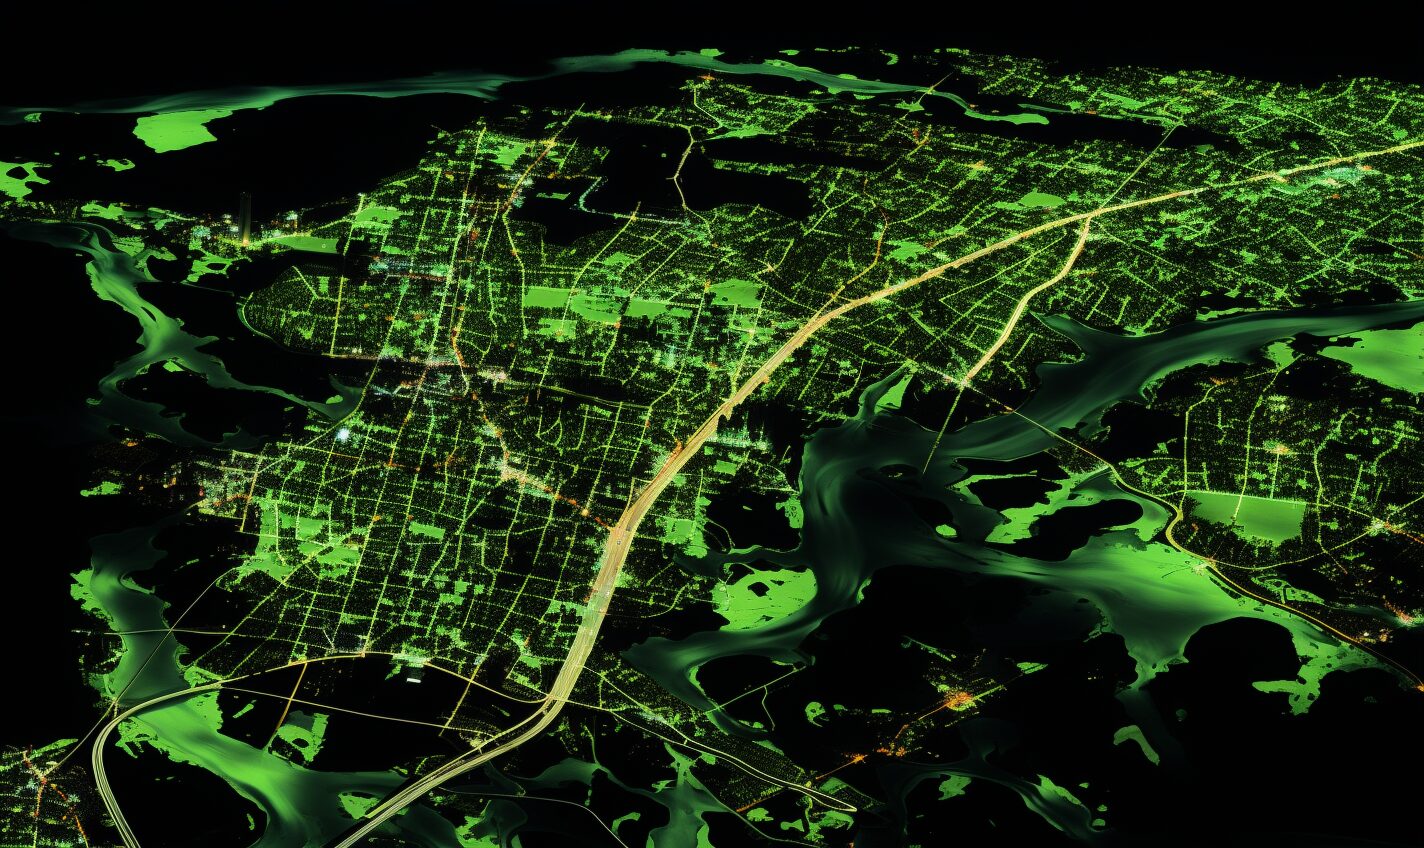 baltimore, maryland in a black and neon green glow